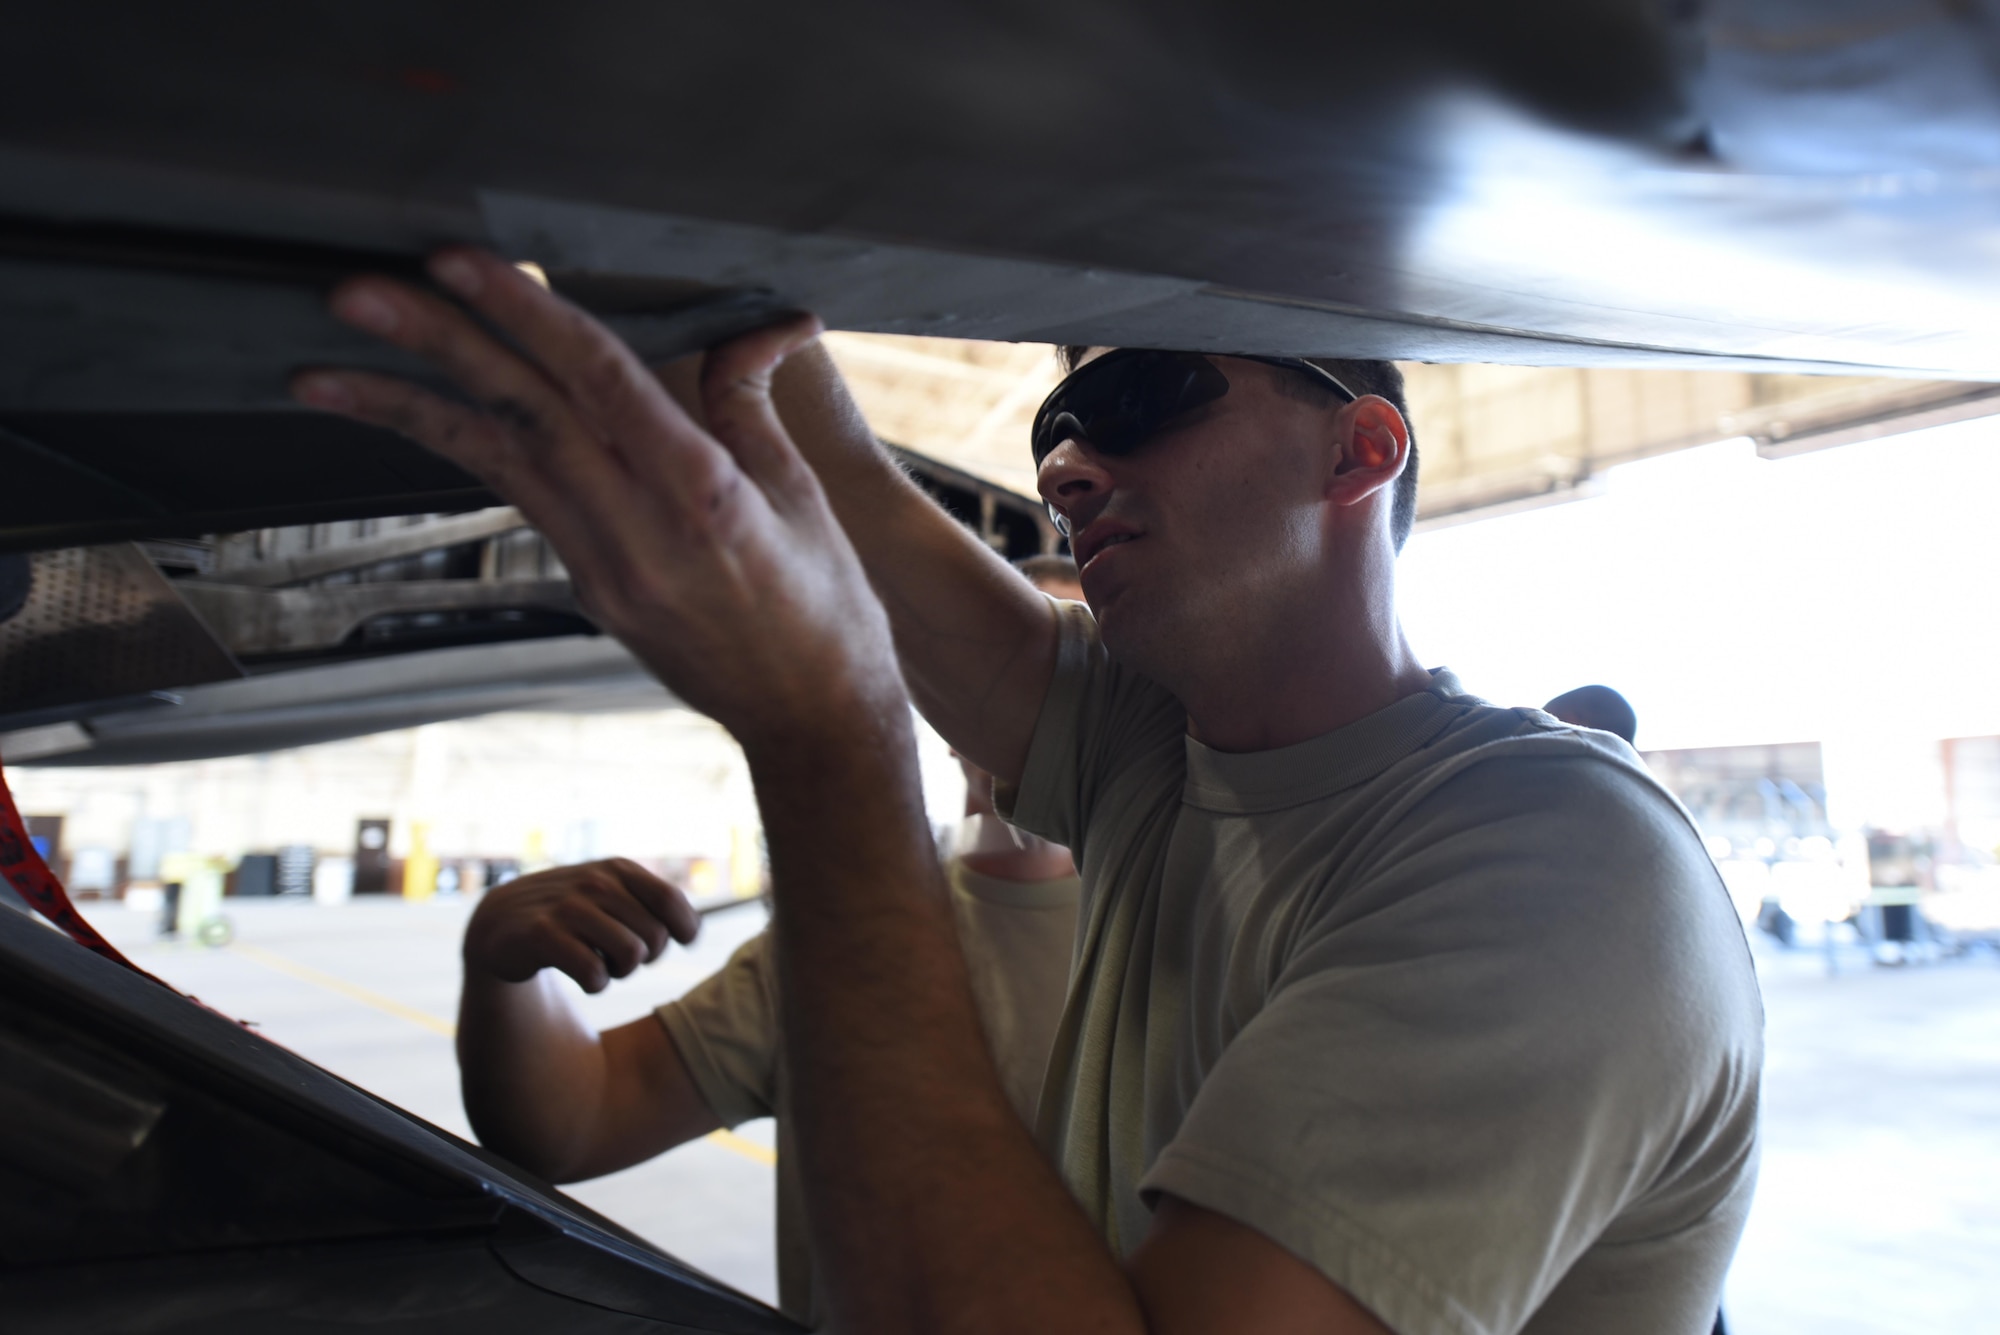 U.S. Air Force Tech. Sgt. Robert Mackle, 325th Aircraft Maintenance Squadron dedicated crew chief, attaches a panel to an F-22 Raptor in Hangar 2 at Tyndall Air Force Base, Fla., March 20, 2017. Throughout the course of a day, dedicated crew chiefs like Mackle inspect and maintain the aircraft of the 95th Fighter Squadron prior to pilots’ takeoff for training. (U.S. Air Force photo by Senior Airman Solomon Cook/Released)